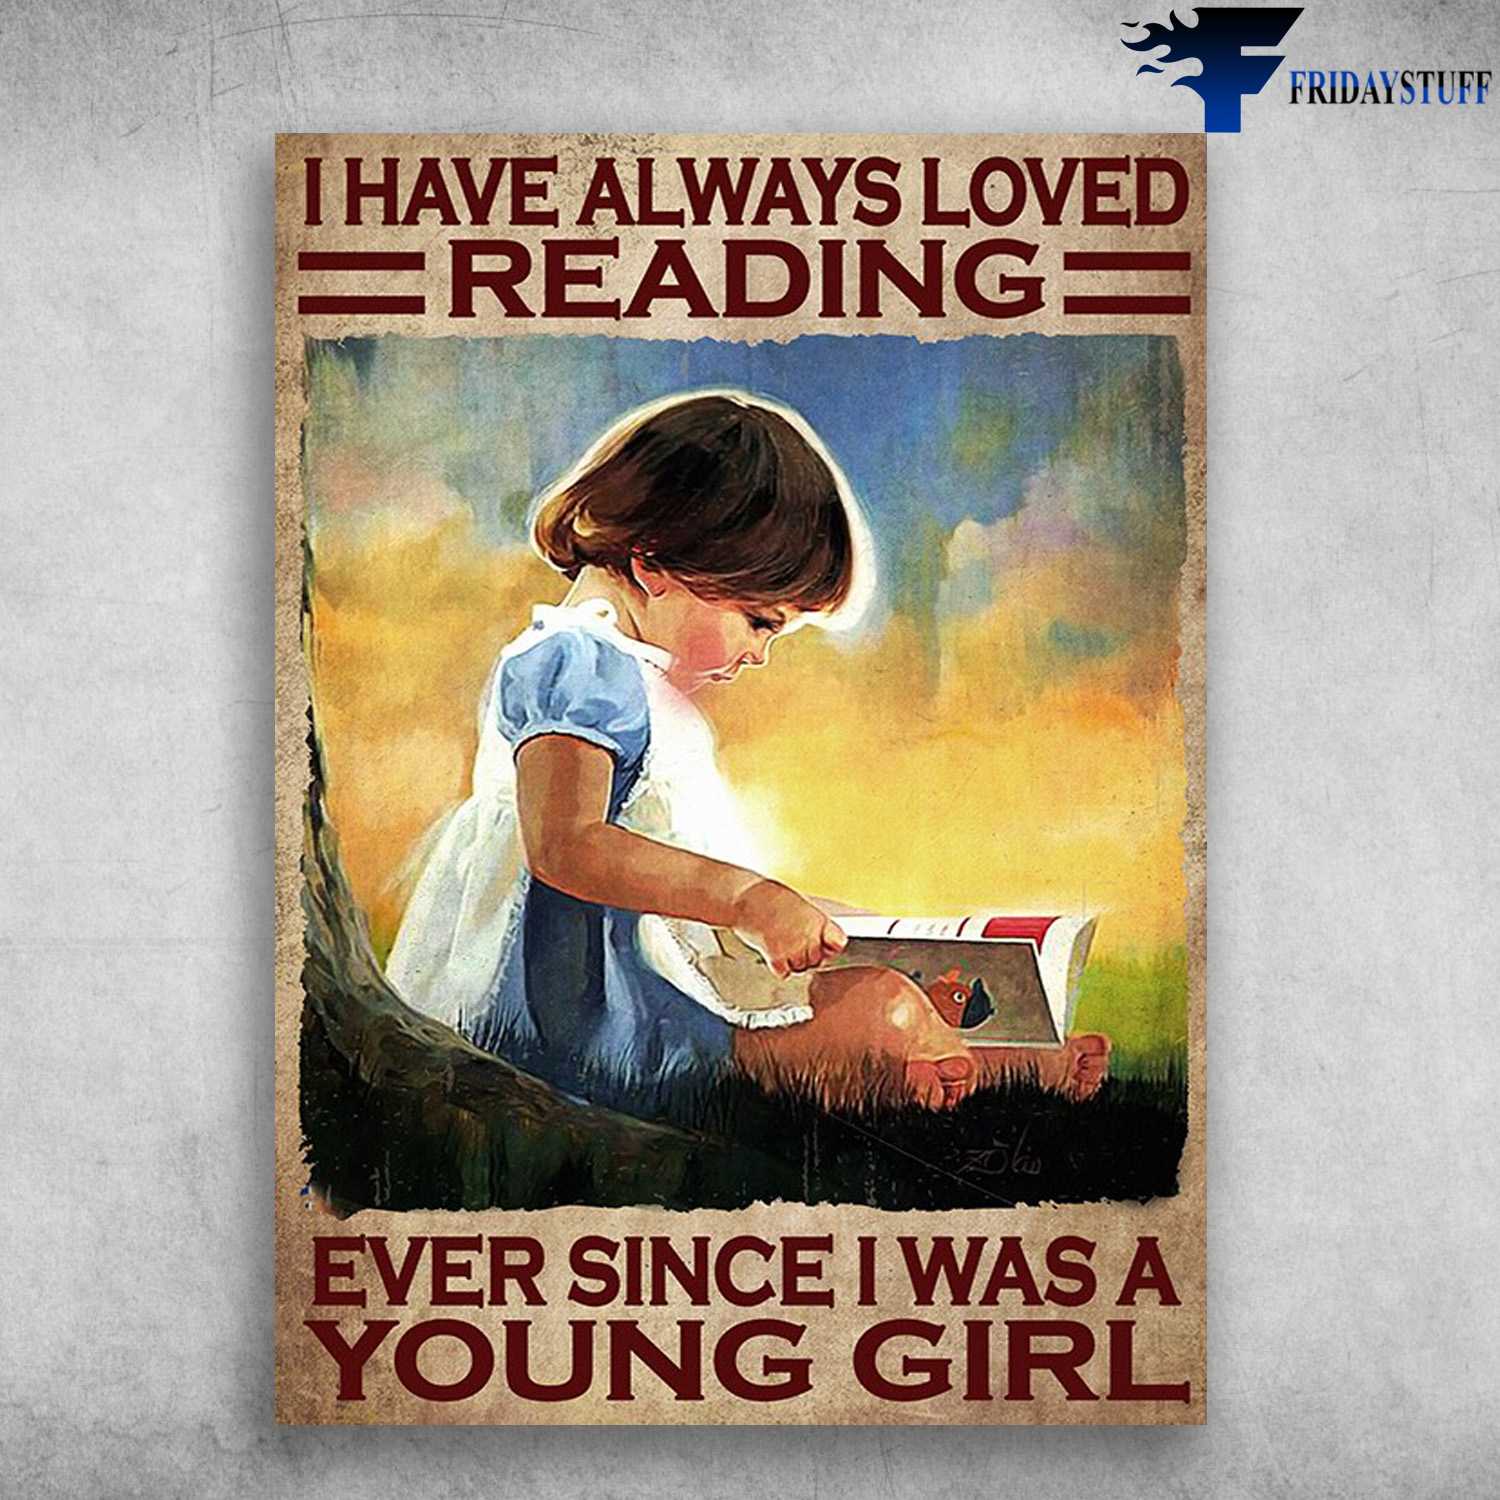 Little Girl Reading, Book Lover - I Have Always Loved Reading, Ever Since I Was A Young Girl